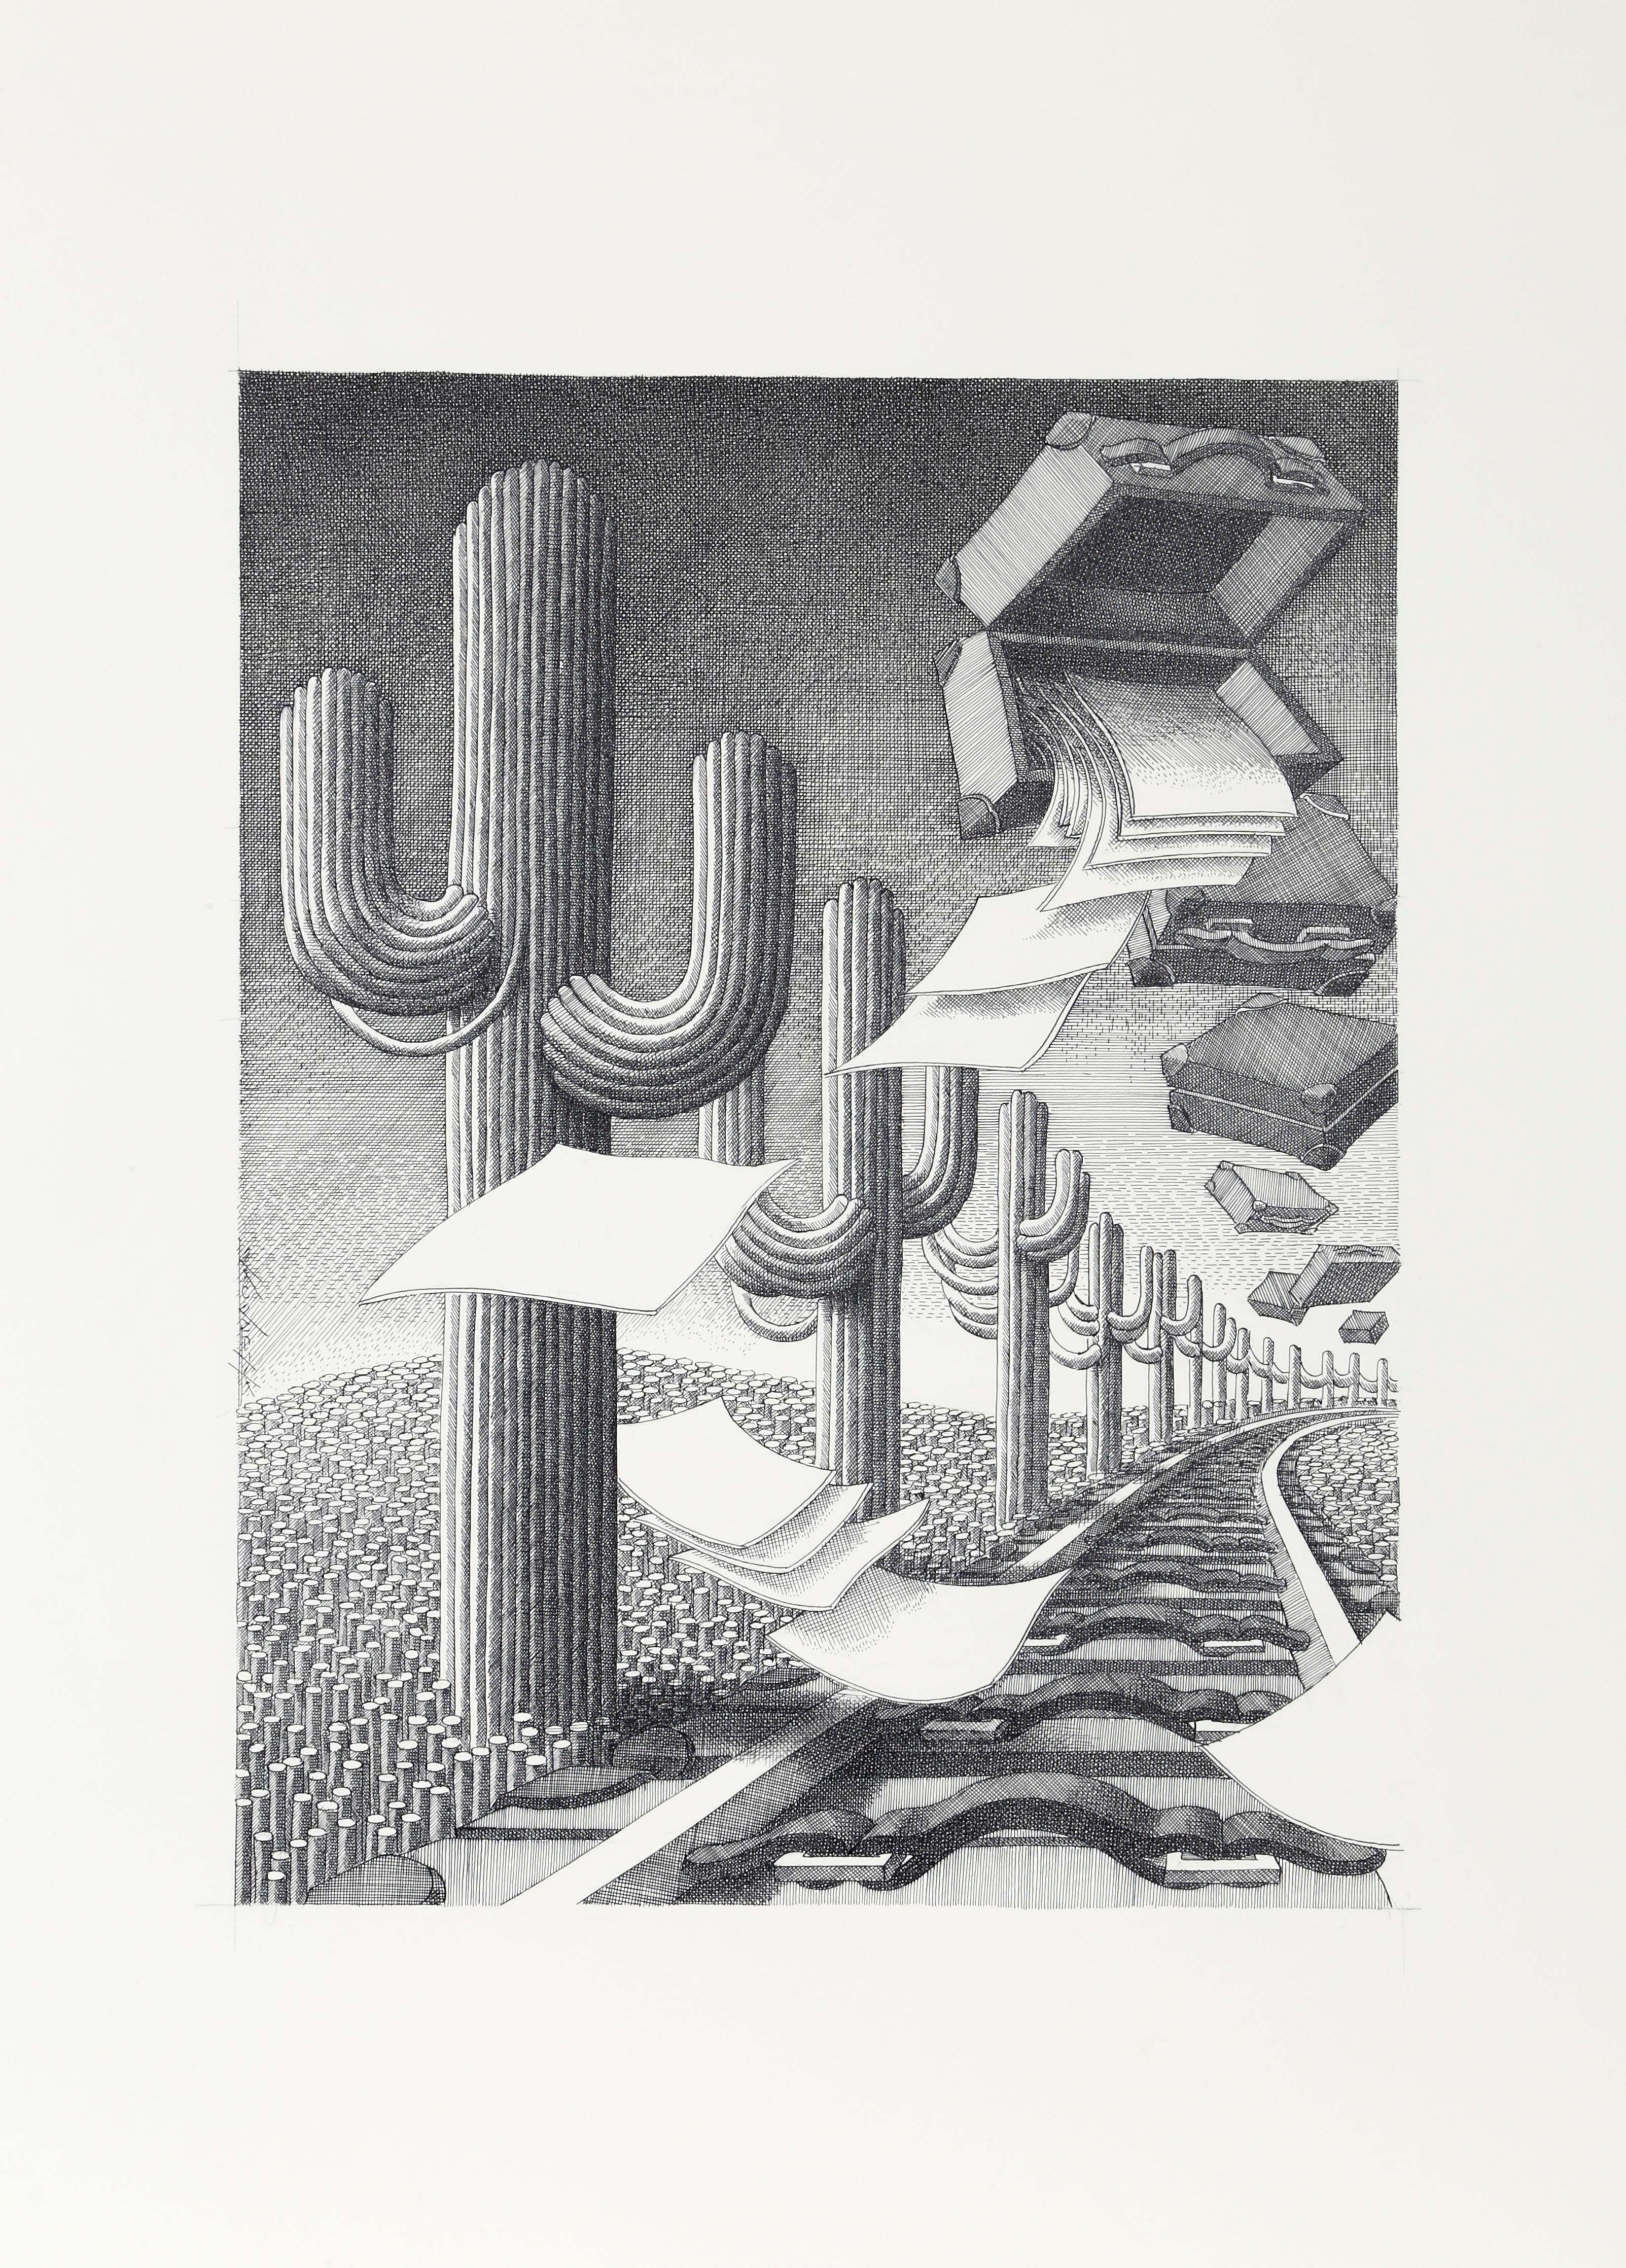 In this intricately hand-drafted and drawn piece by Polish artist Wojtek Kowalczyk, a railroad track seems to stretch on into infinity. On the left, the tracks are lined with cacti that are slowly unraveling into ropes. Briefcases fly overhead,